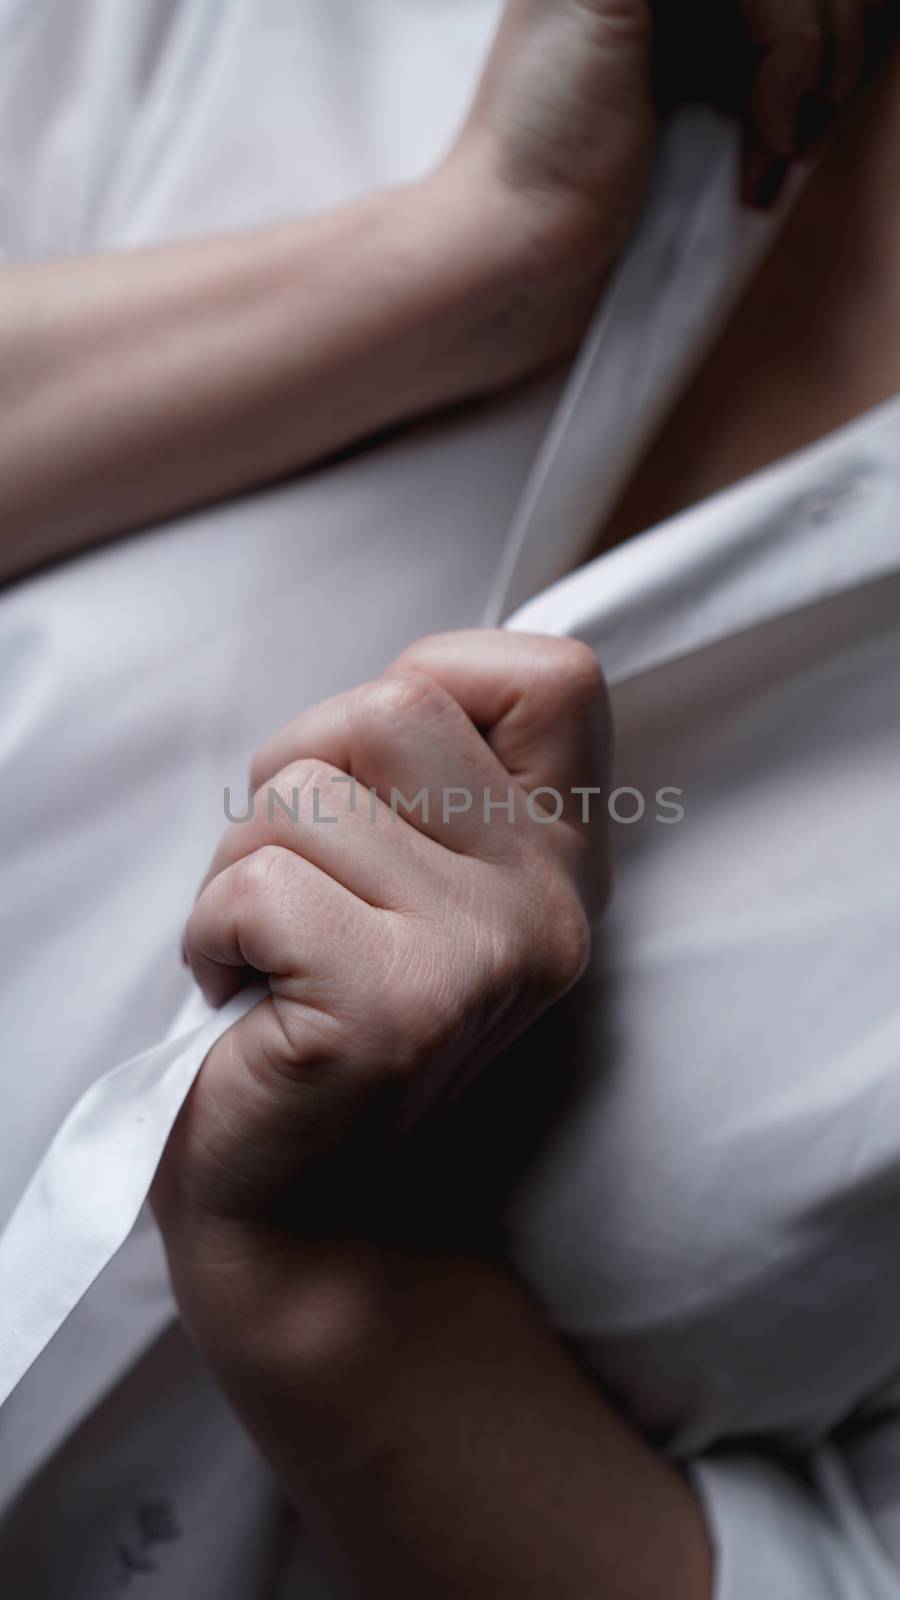 A woman holds her hands for mens white shirt. Photo without face by natali_brill